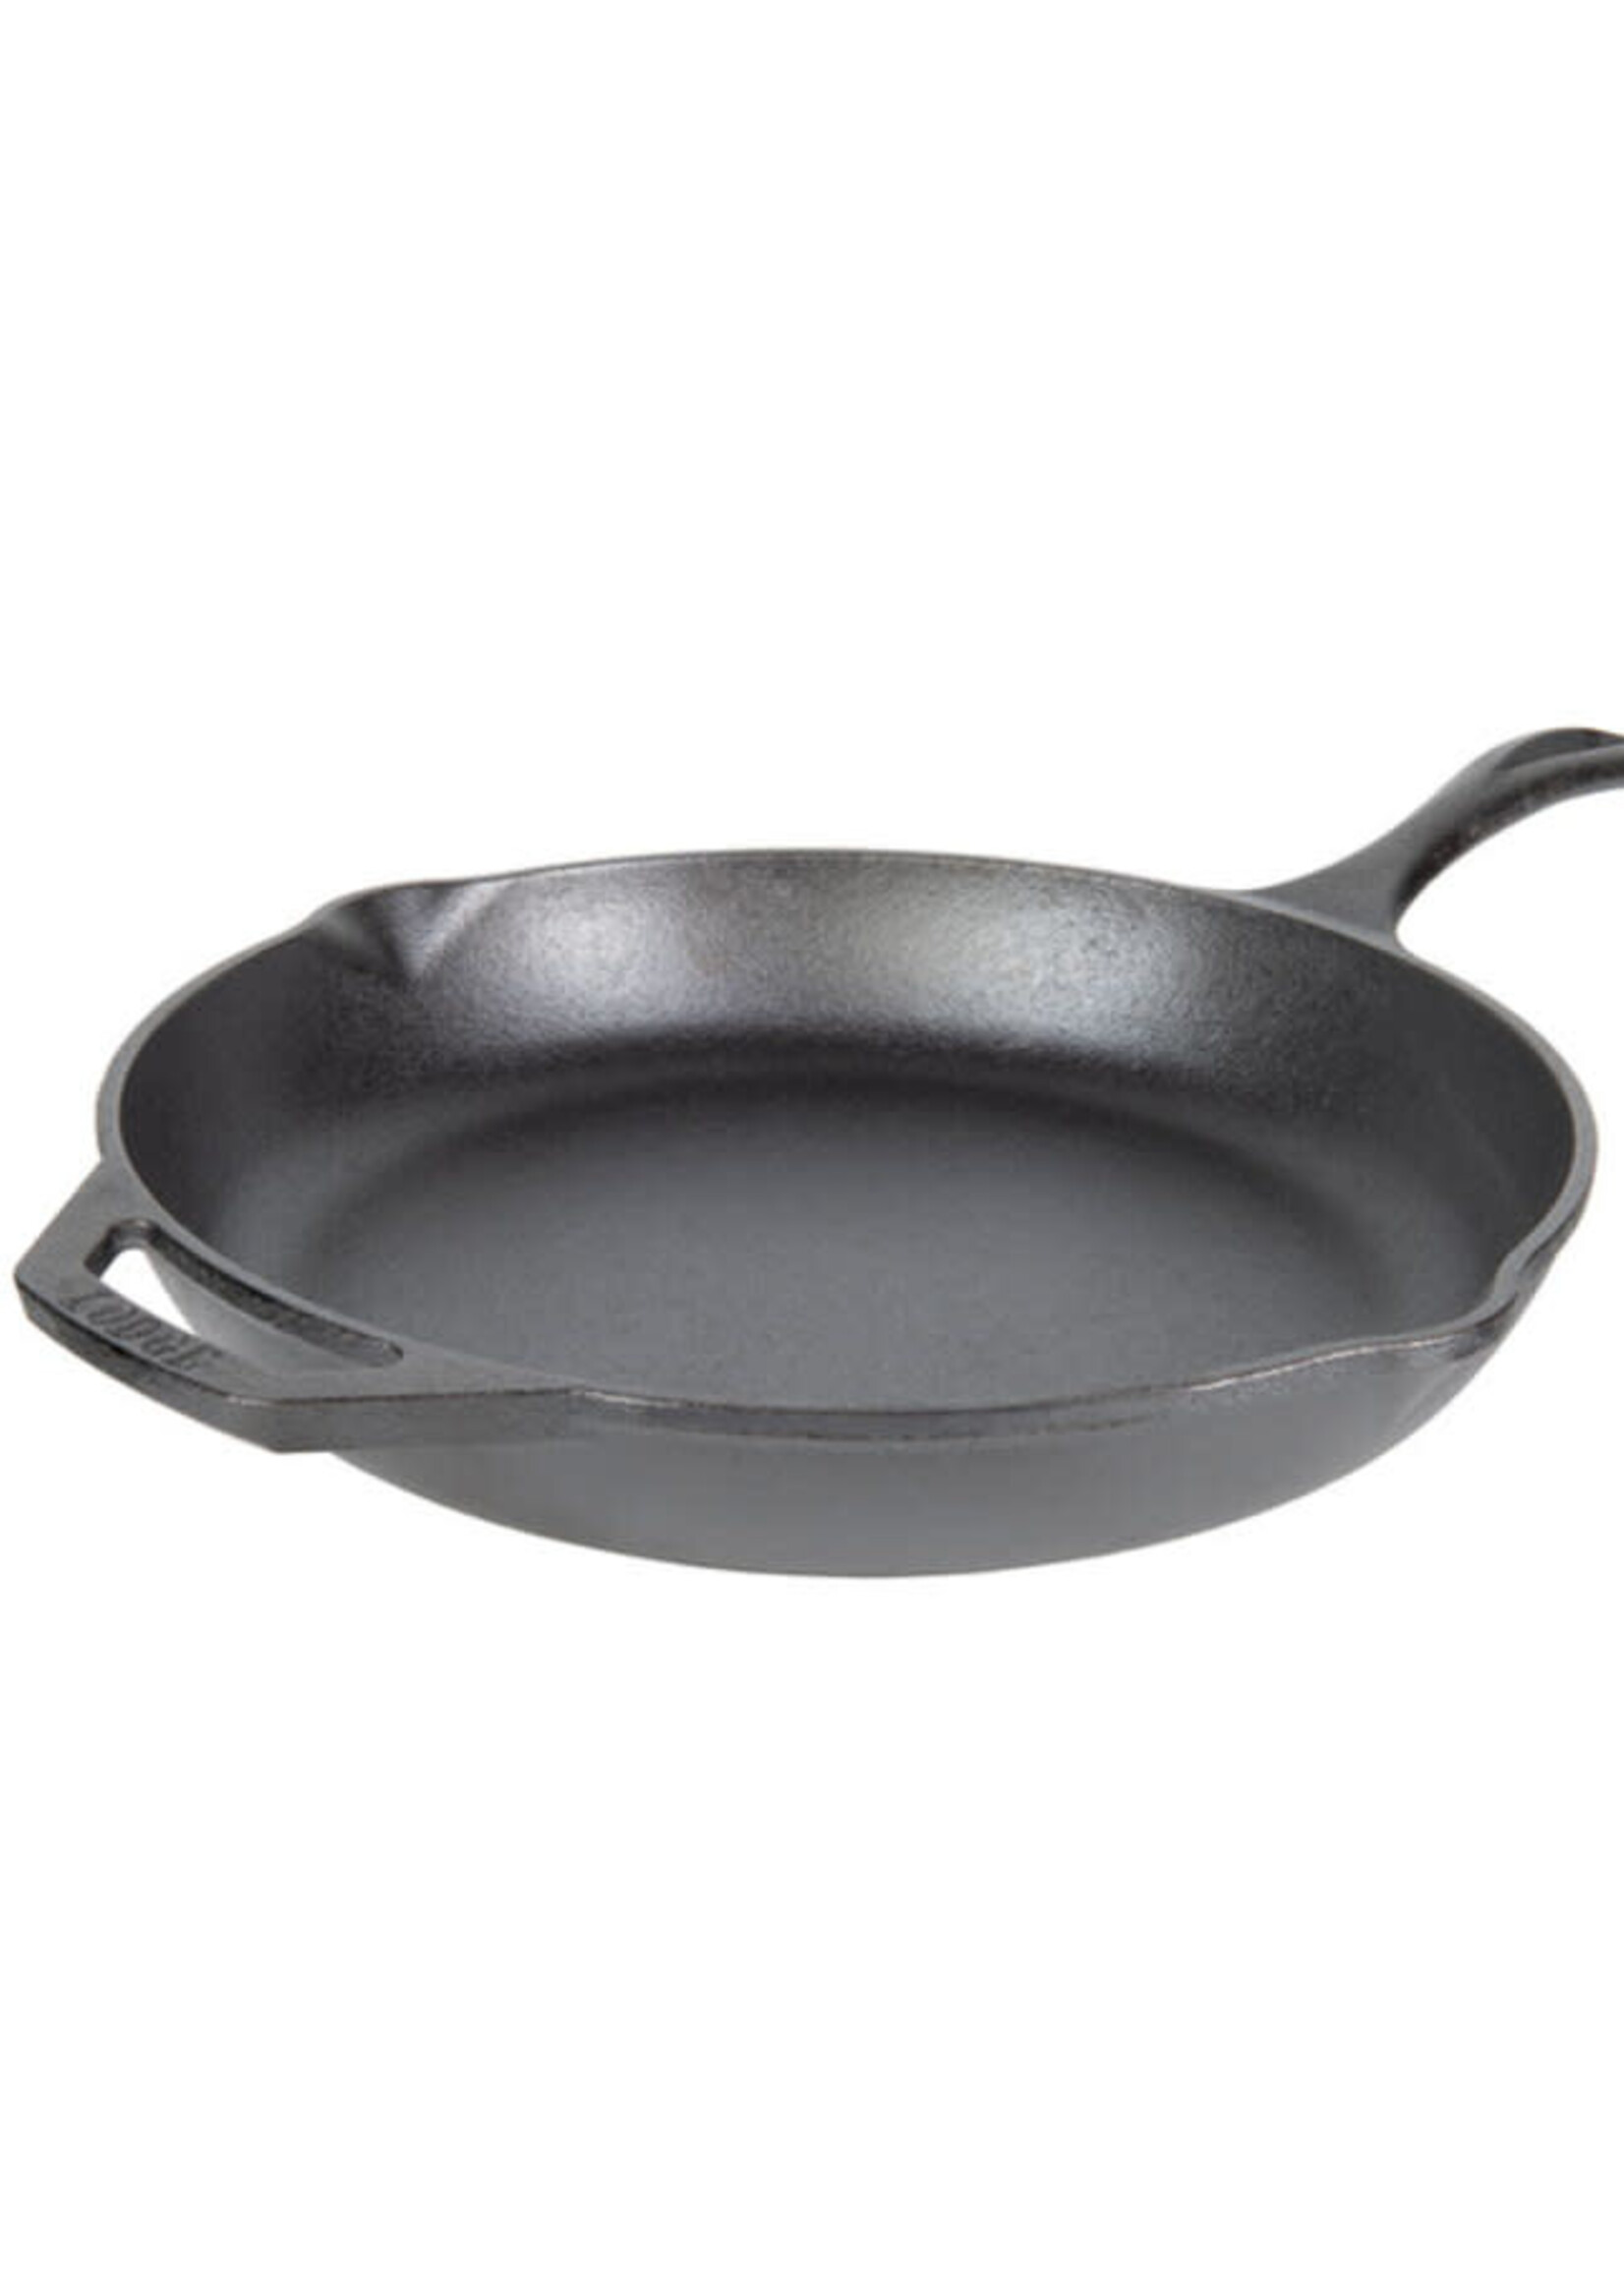 Lodge 12" Chef Style Skillet